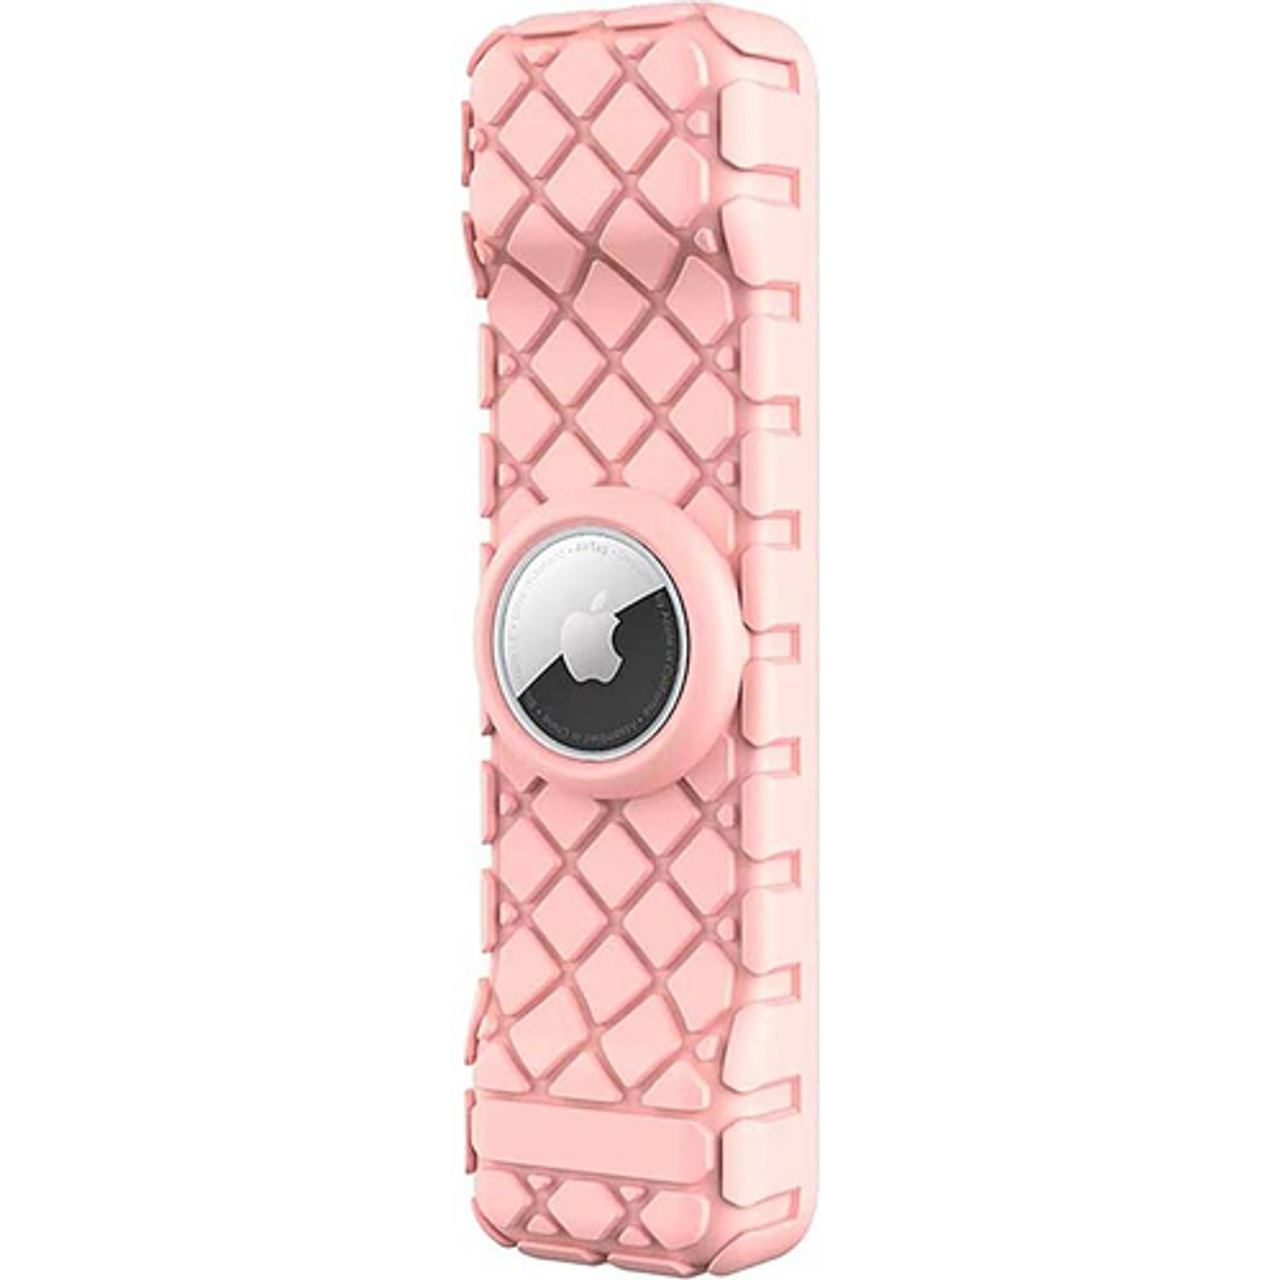 SaharaCase - Apple TV 4K Remote Silicone Case for Apple AirTag - Pink